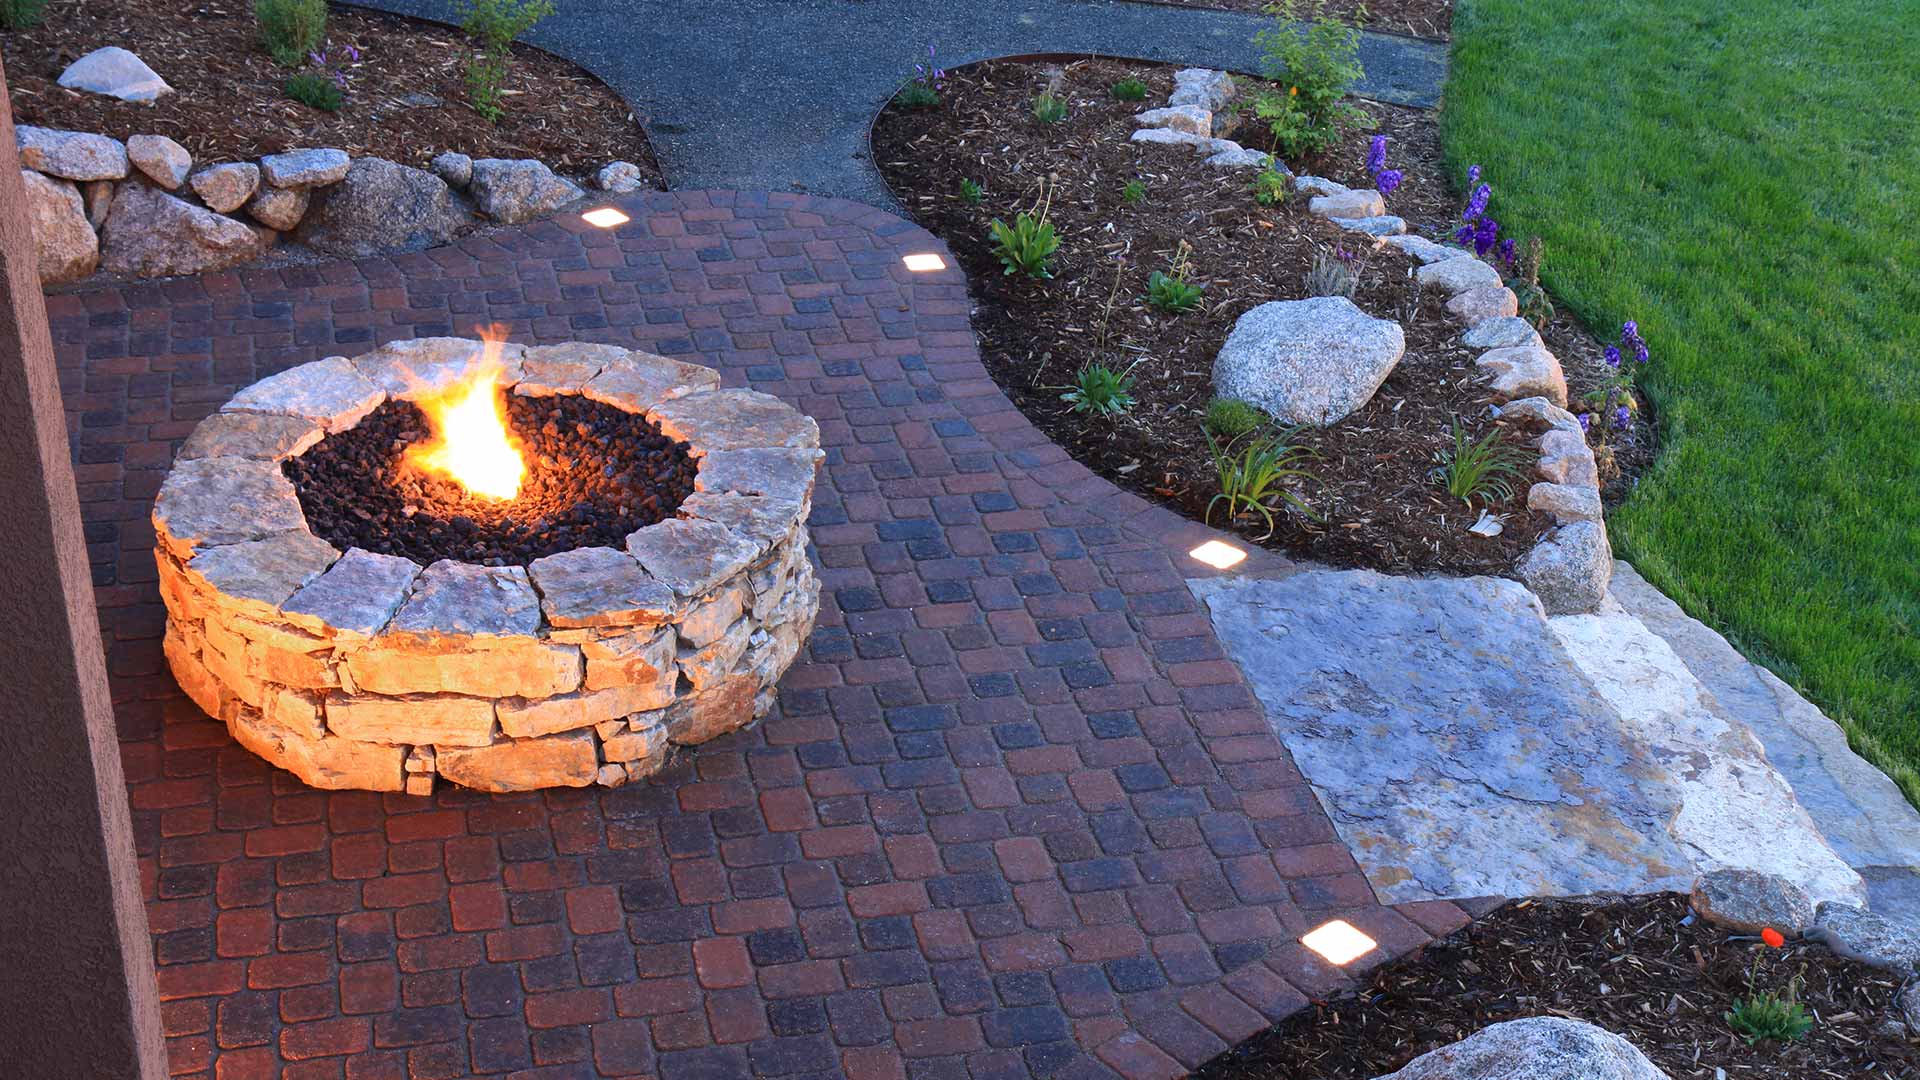 Should Your Outdoor Fire Feature Be Made of Bricks, Stones, or Boulders?